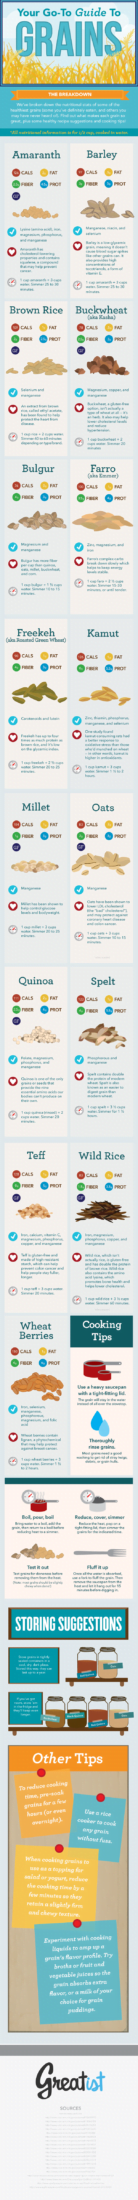 Your Go-To Guide for Choosing Healthier Grains